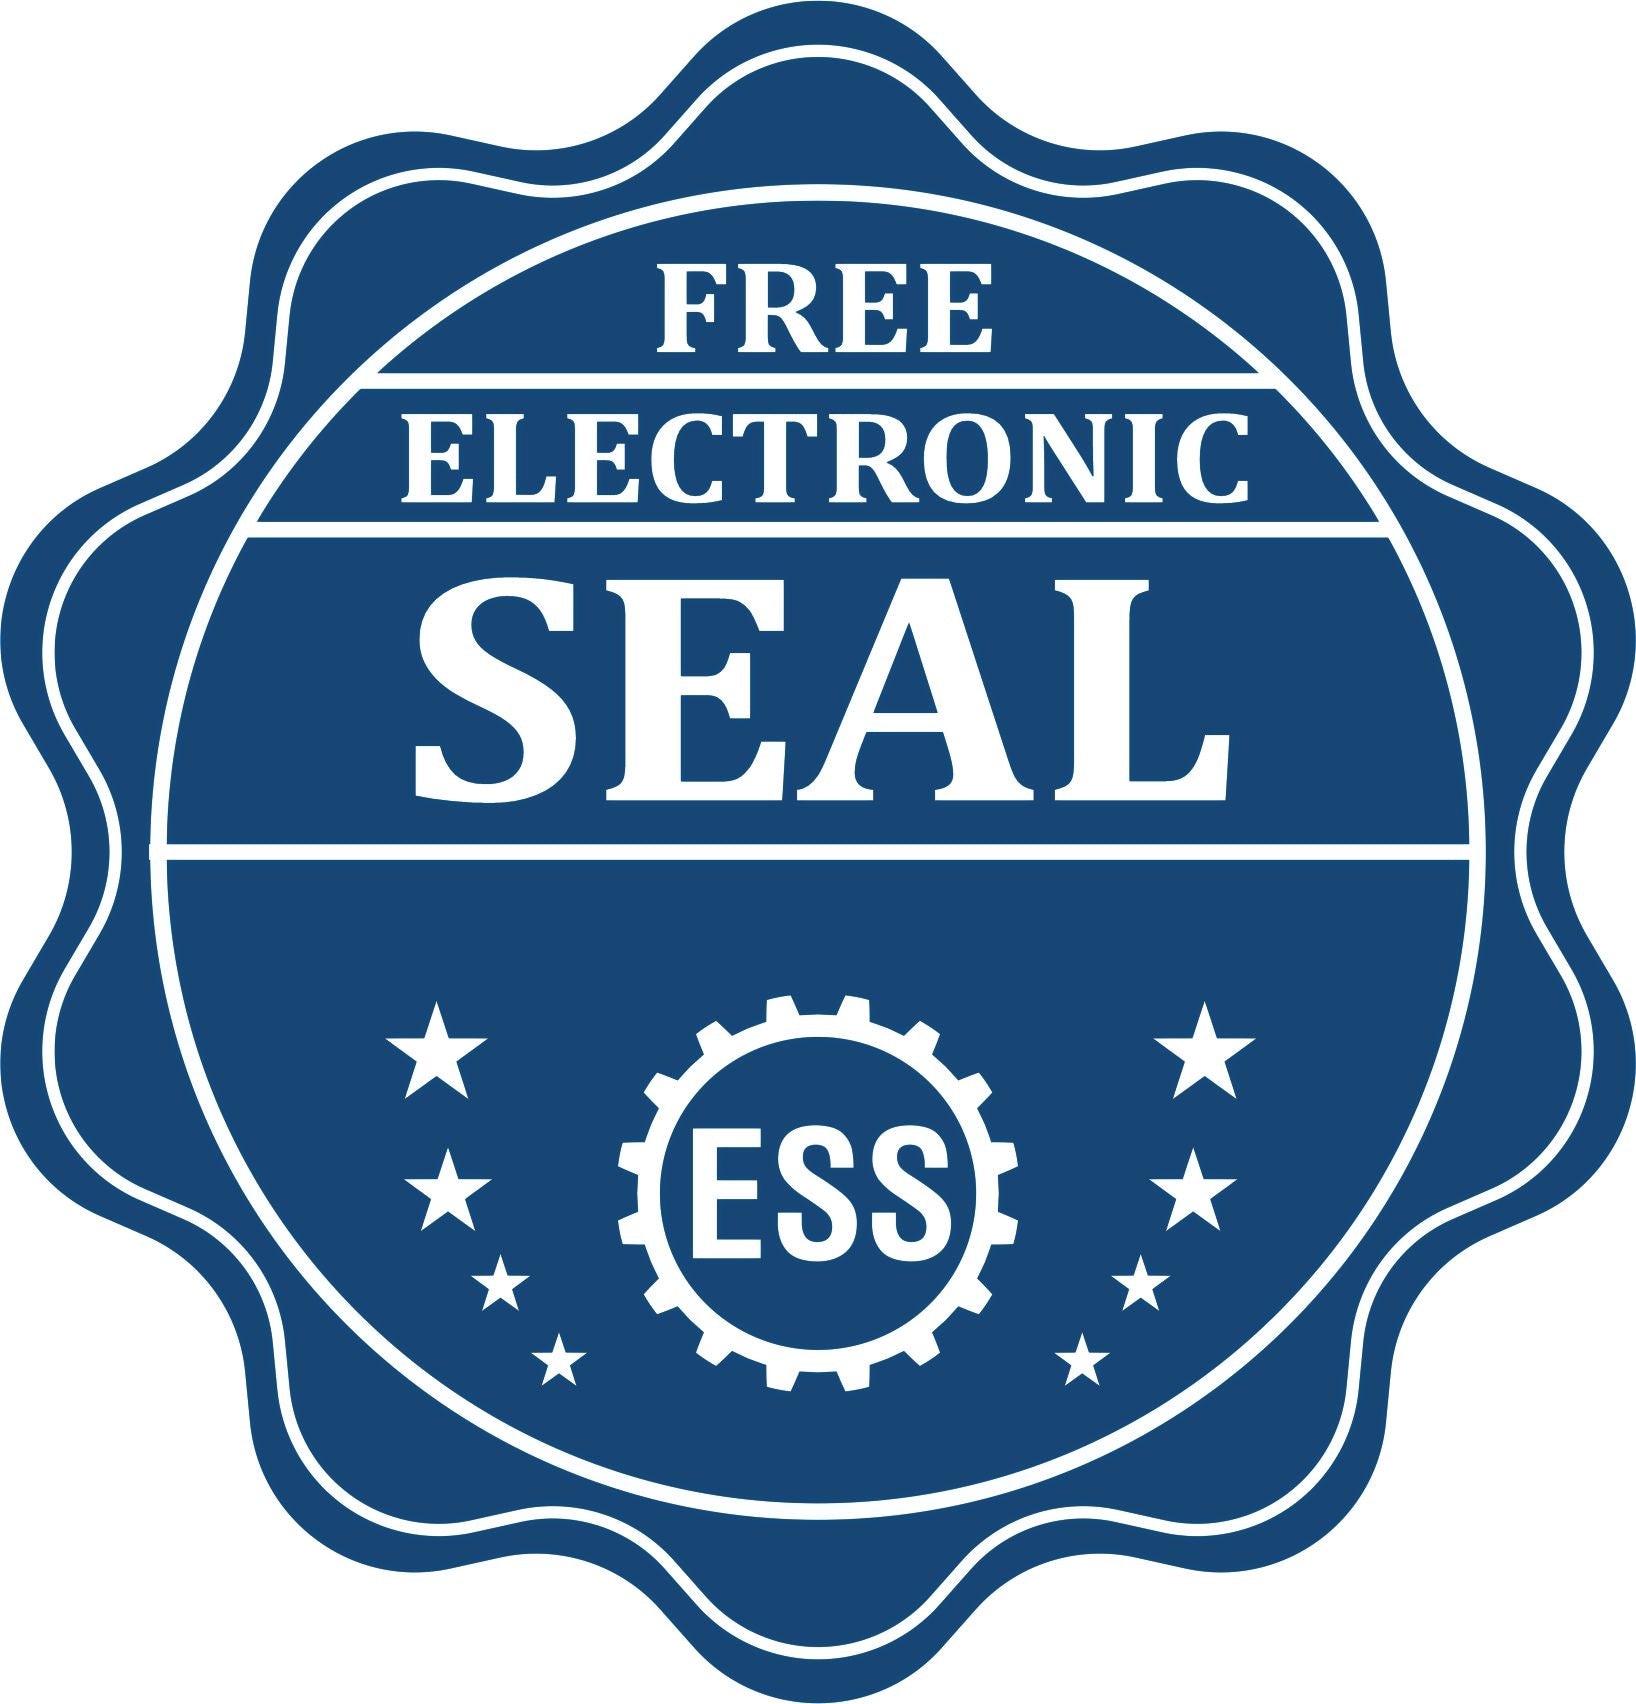 A badge showing a free electronic seal for the Michigan Professional Engineer Seal Stamp with stars and the ESS gear on the emblem.